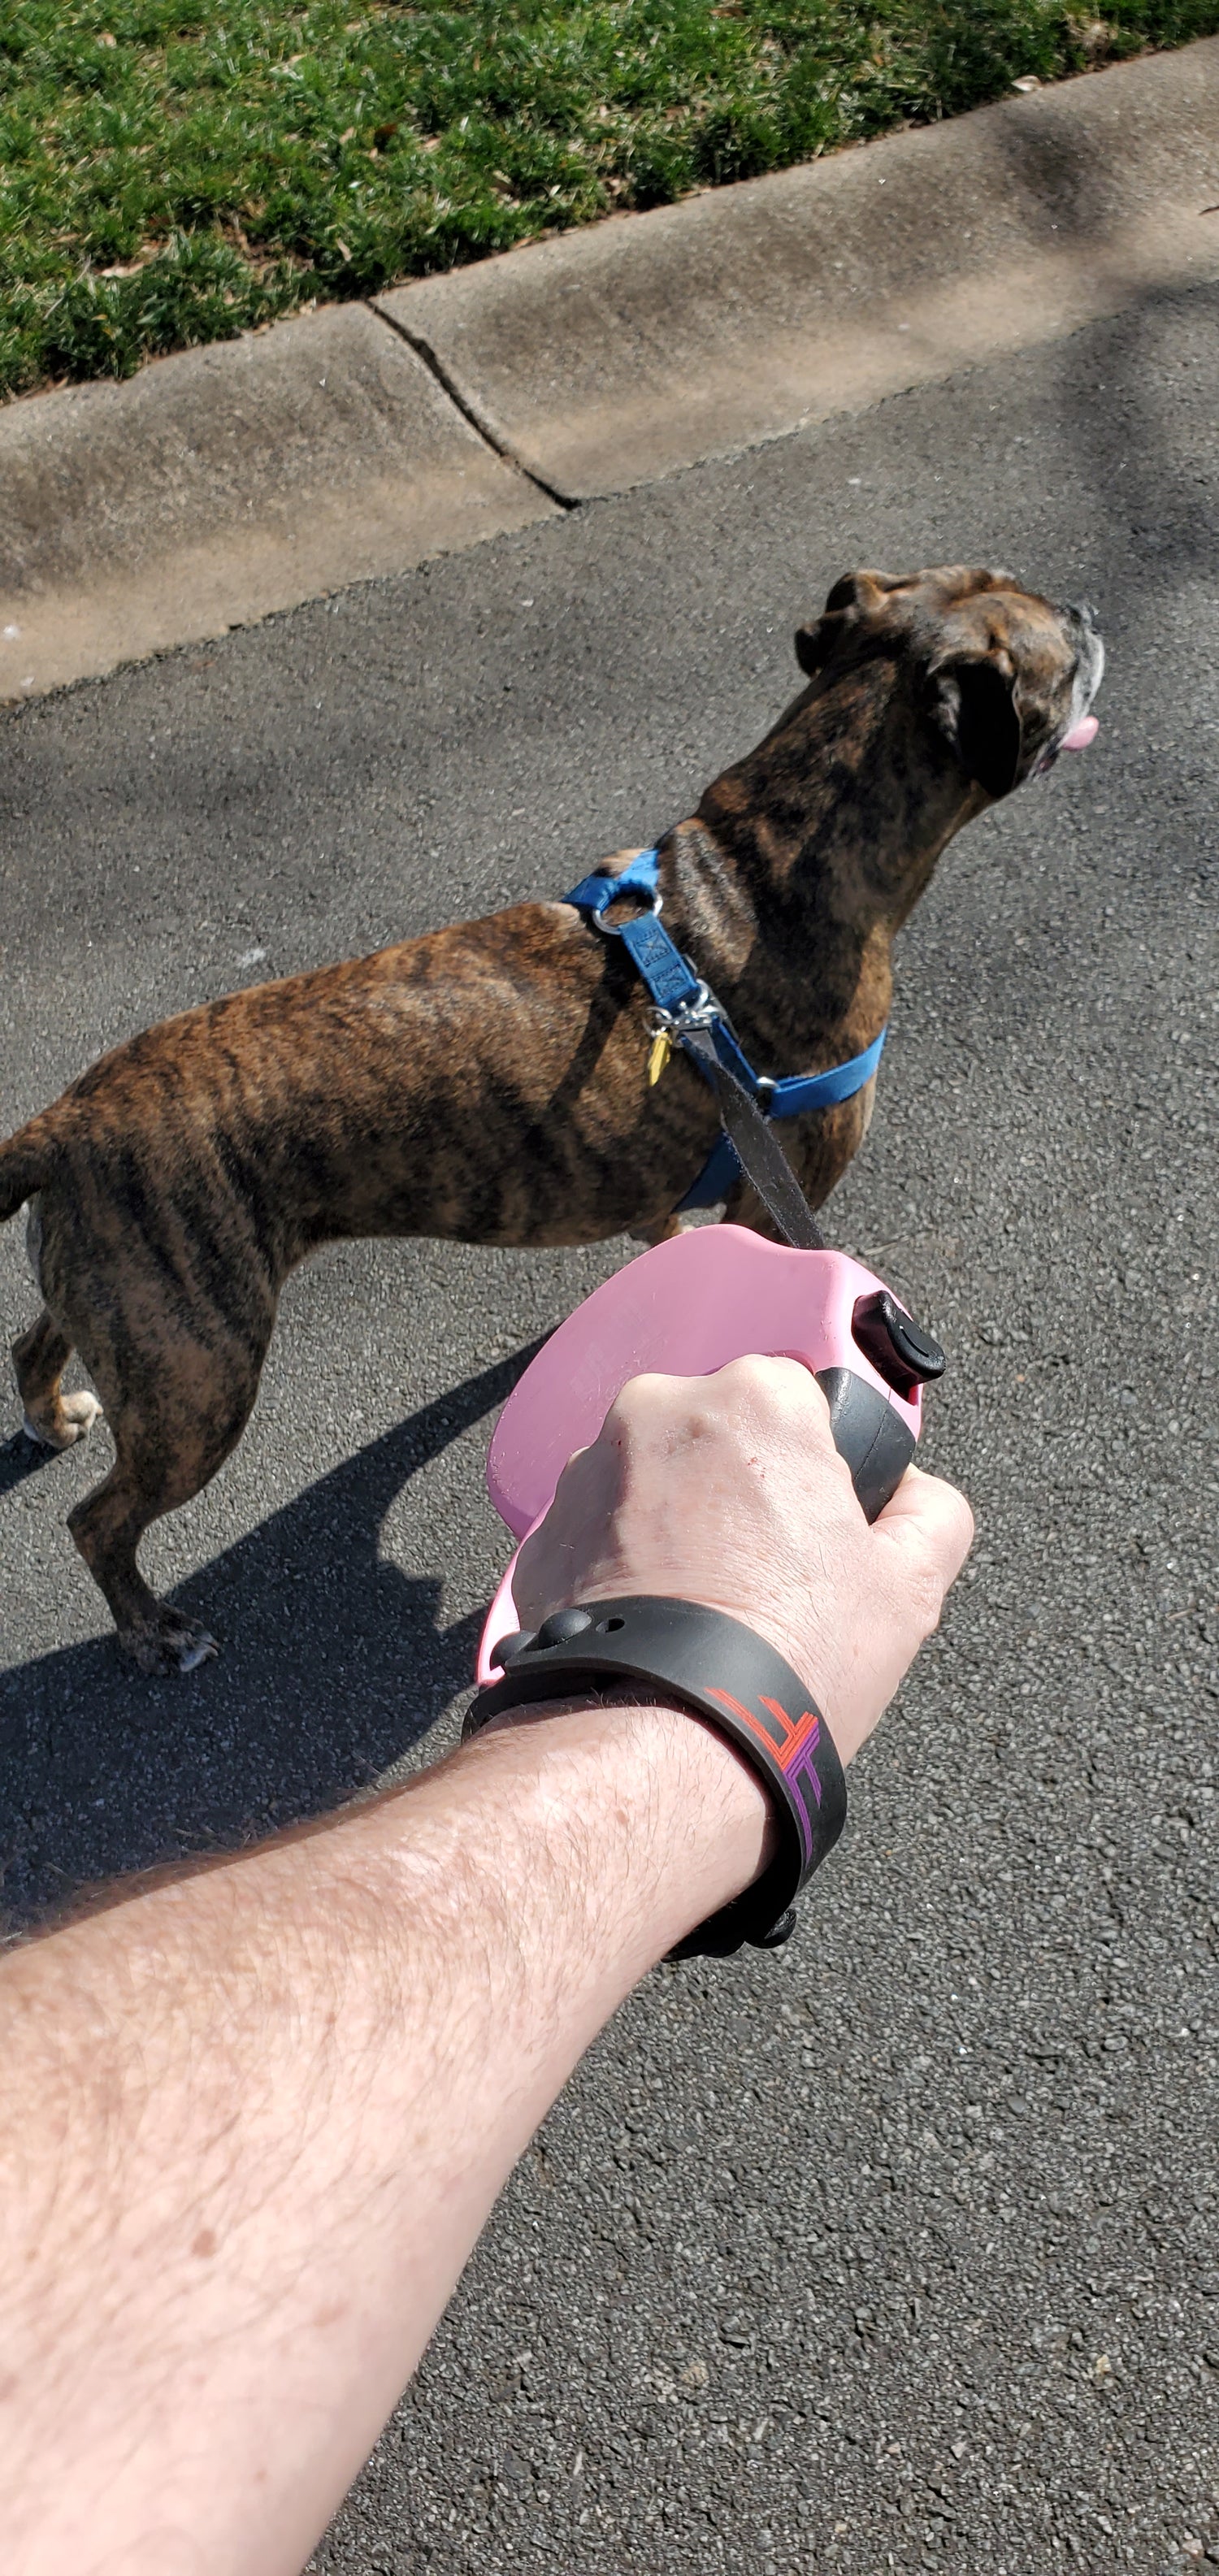 Wearing the patented Flip Flap as a bracelet while walking the doggins.